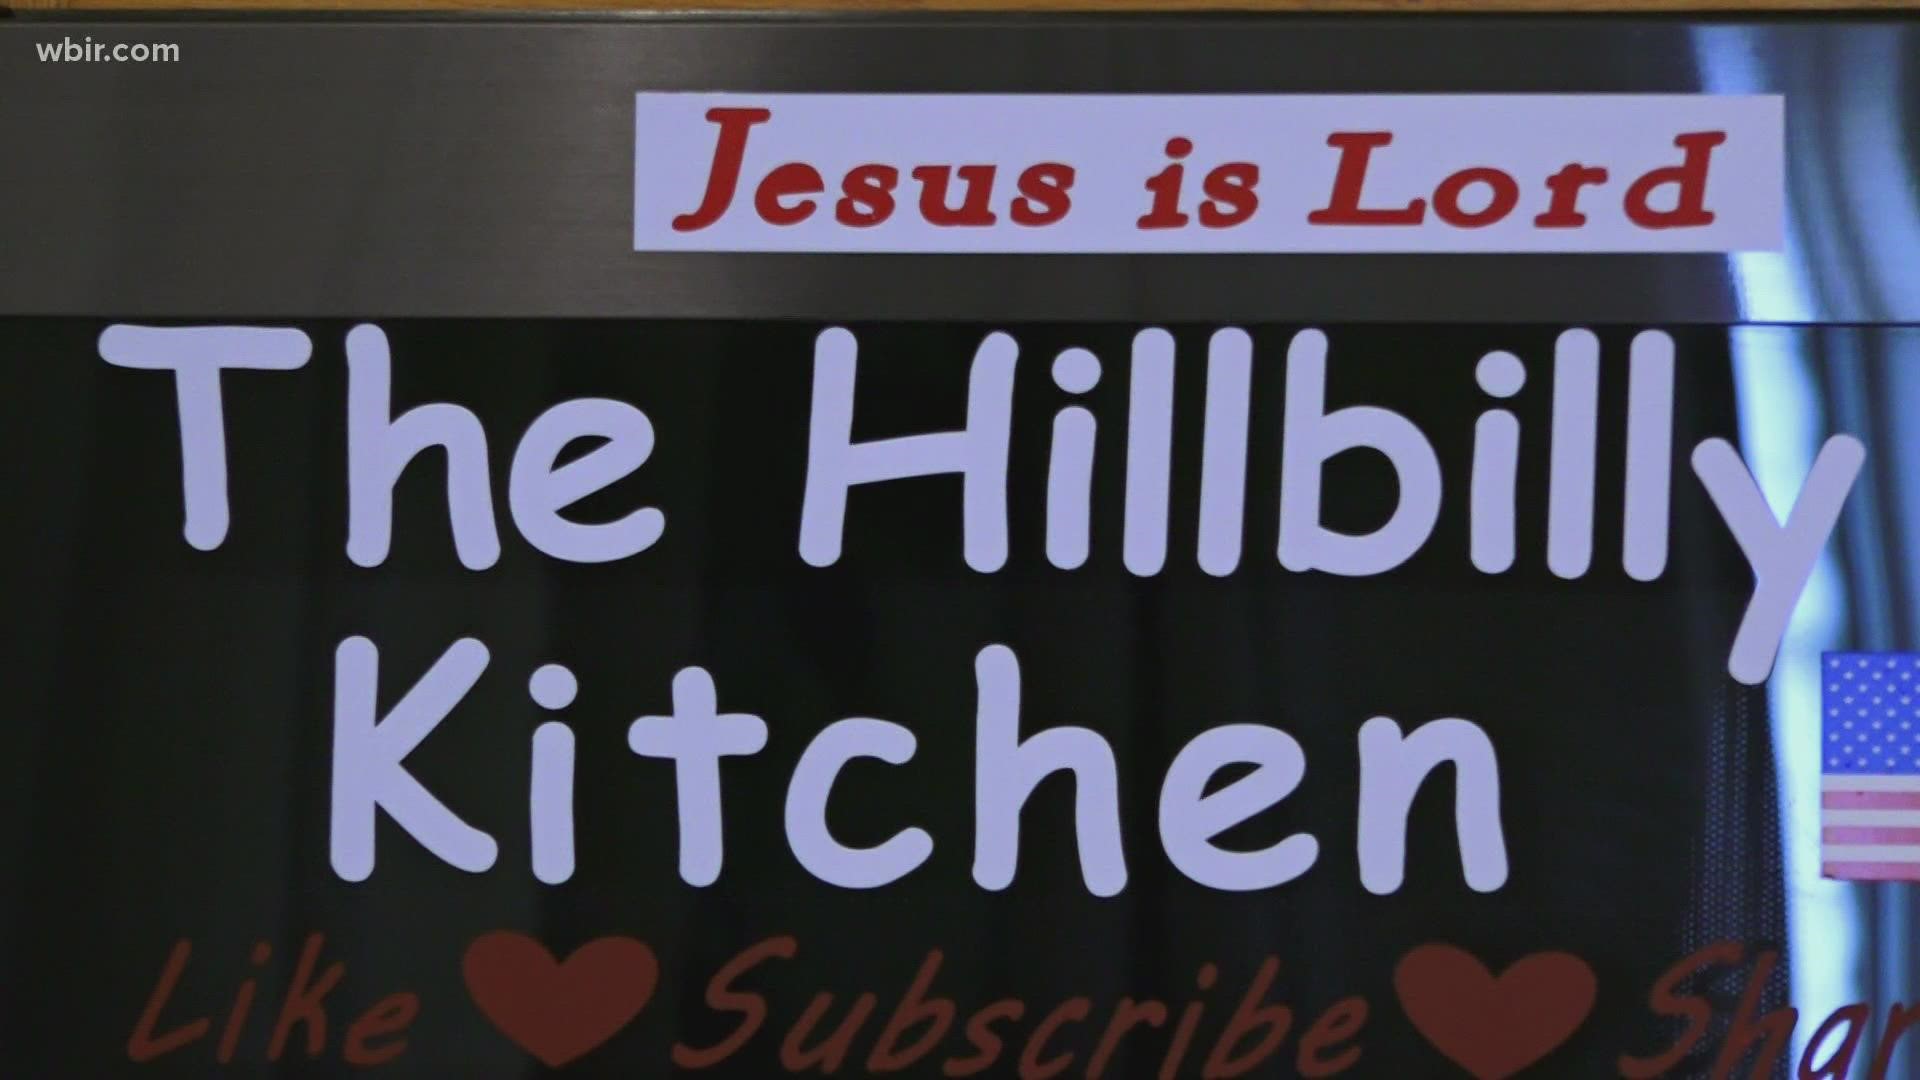 Becky Walker has more than 600,000 subscribers on her YouTube channel 'The Hillbilly Kitchen,' with some videos surpassing 2 million views.